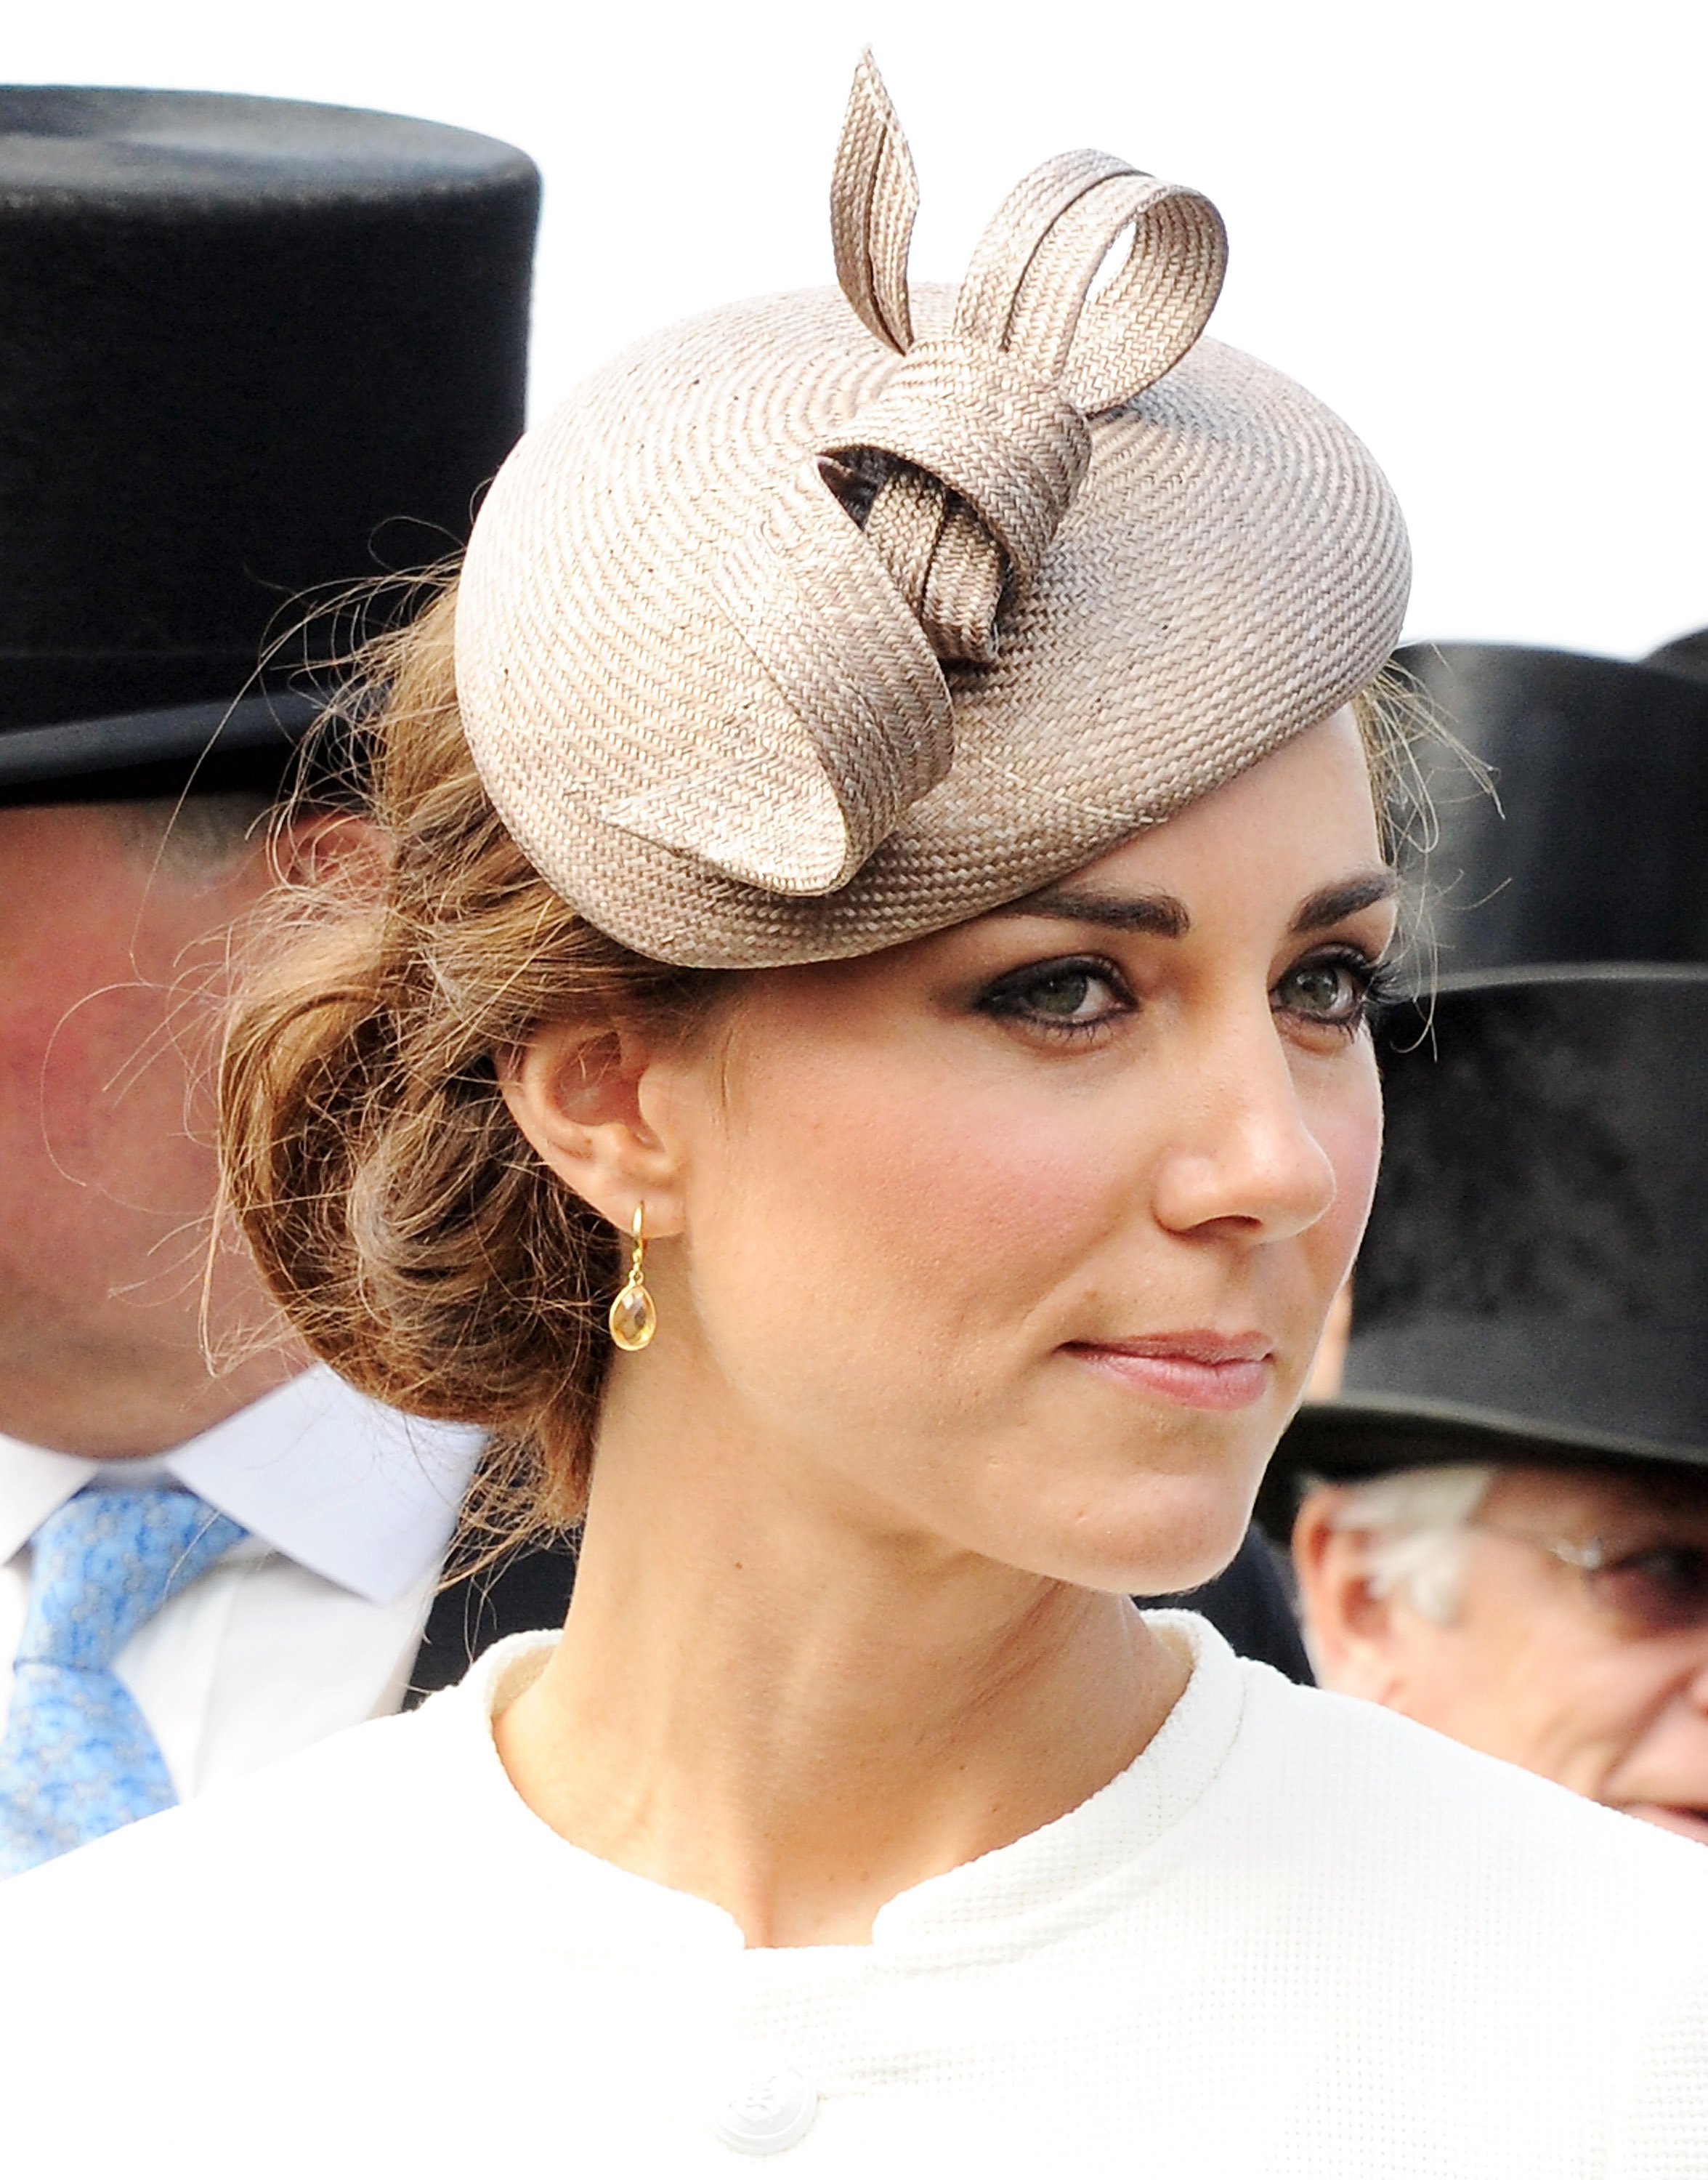 Catherine, Duchess of Cambridge attends Investec Derby Day at the Investec Derby Festival at Epsom Downs Racecourse on June 4, 2011 in Epsom, England | Source: Getty Images